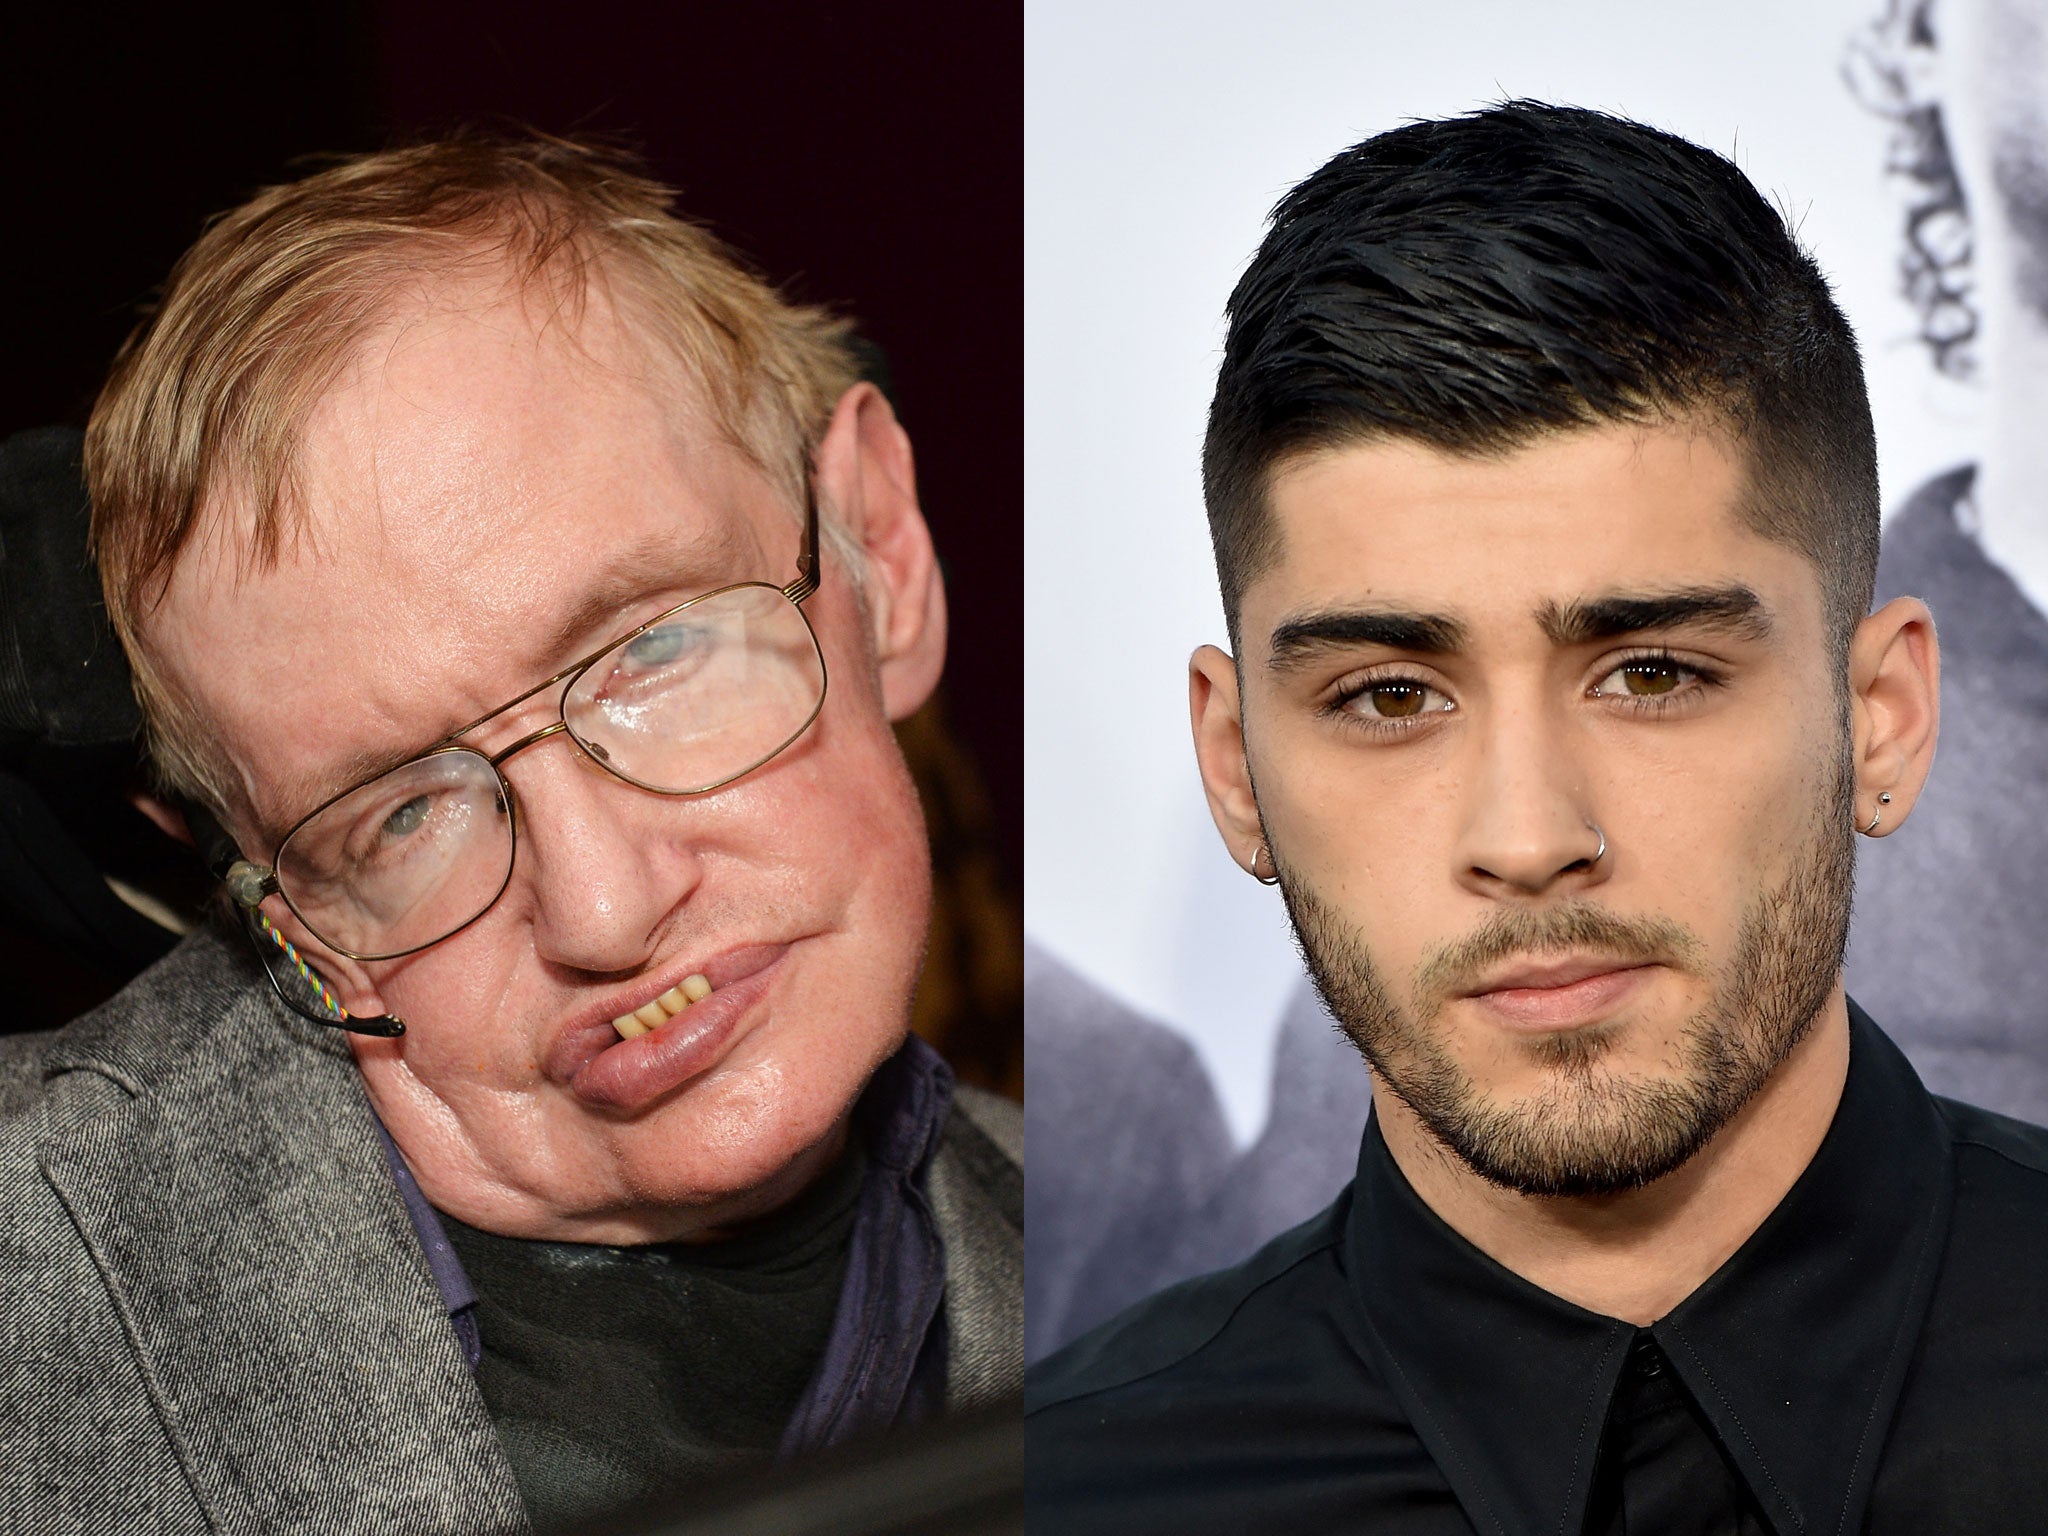 Heartbroken One Direction fans sought solace in an unlikely source, after Professor Stephen Hawking said: 'One day there may well be proof of multiple universes… and in that universe Zayn is still in One Direction.'